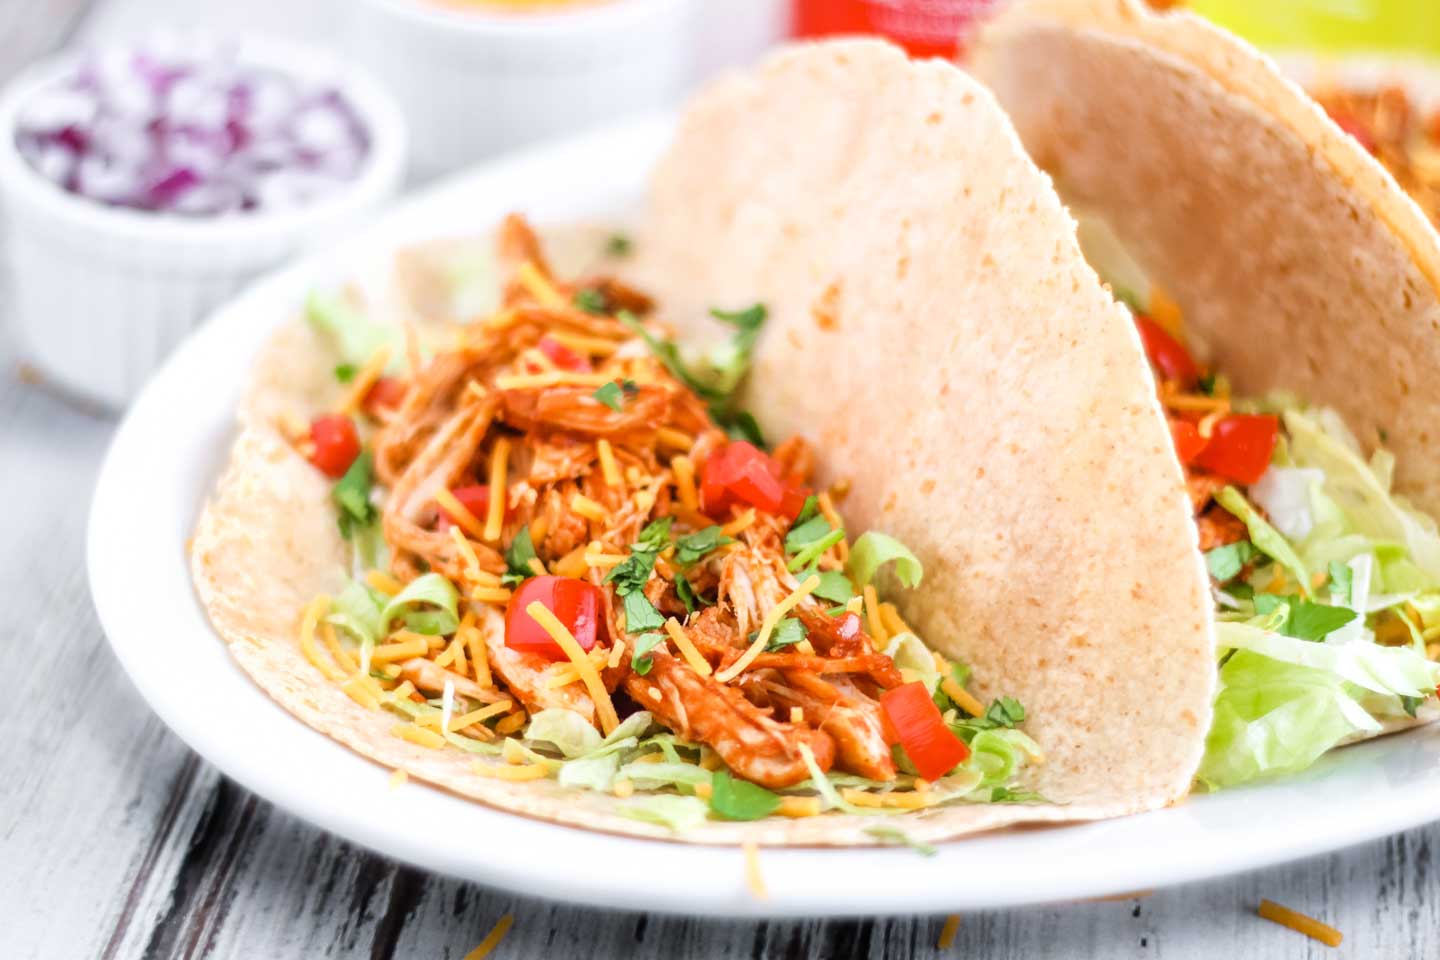 These clay pot chicken tacos served on whole wheat tortillas, instead of corn. Lined in a serving dish and sprinkled with lettuce, cheese and tomato.